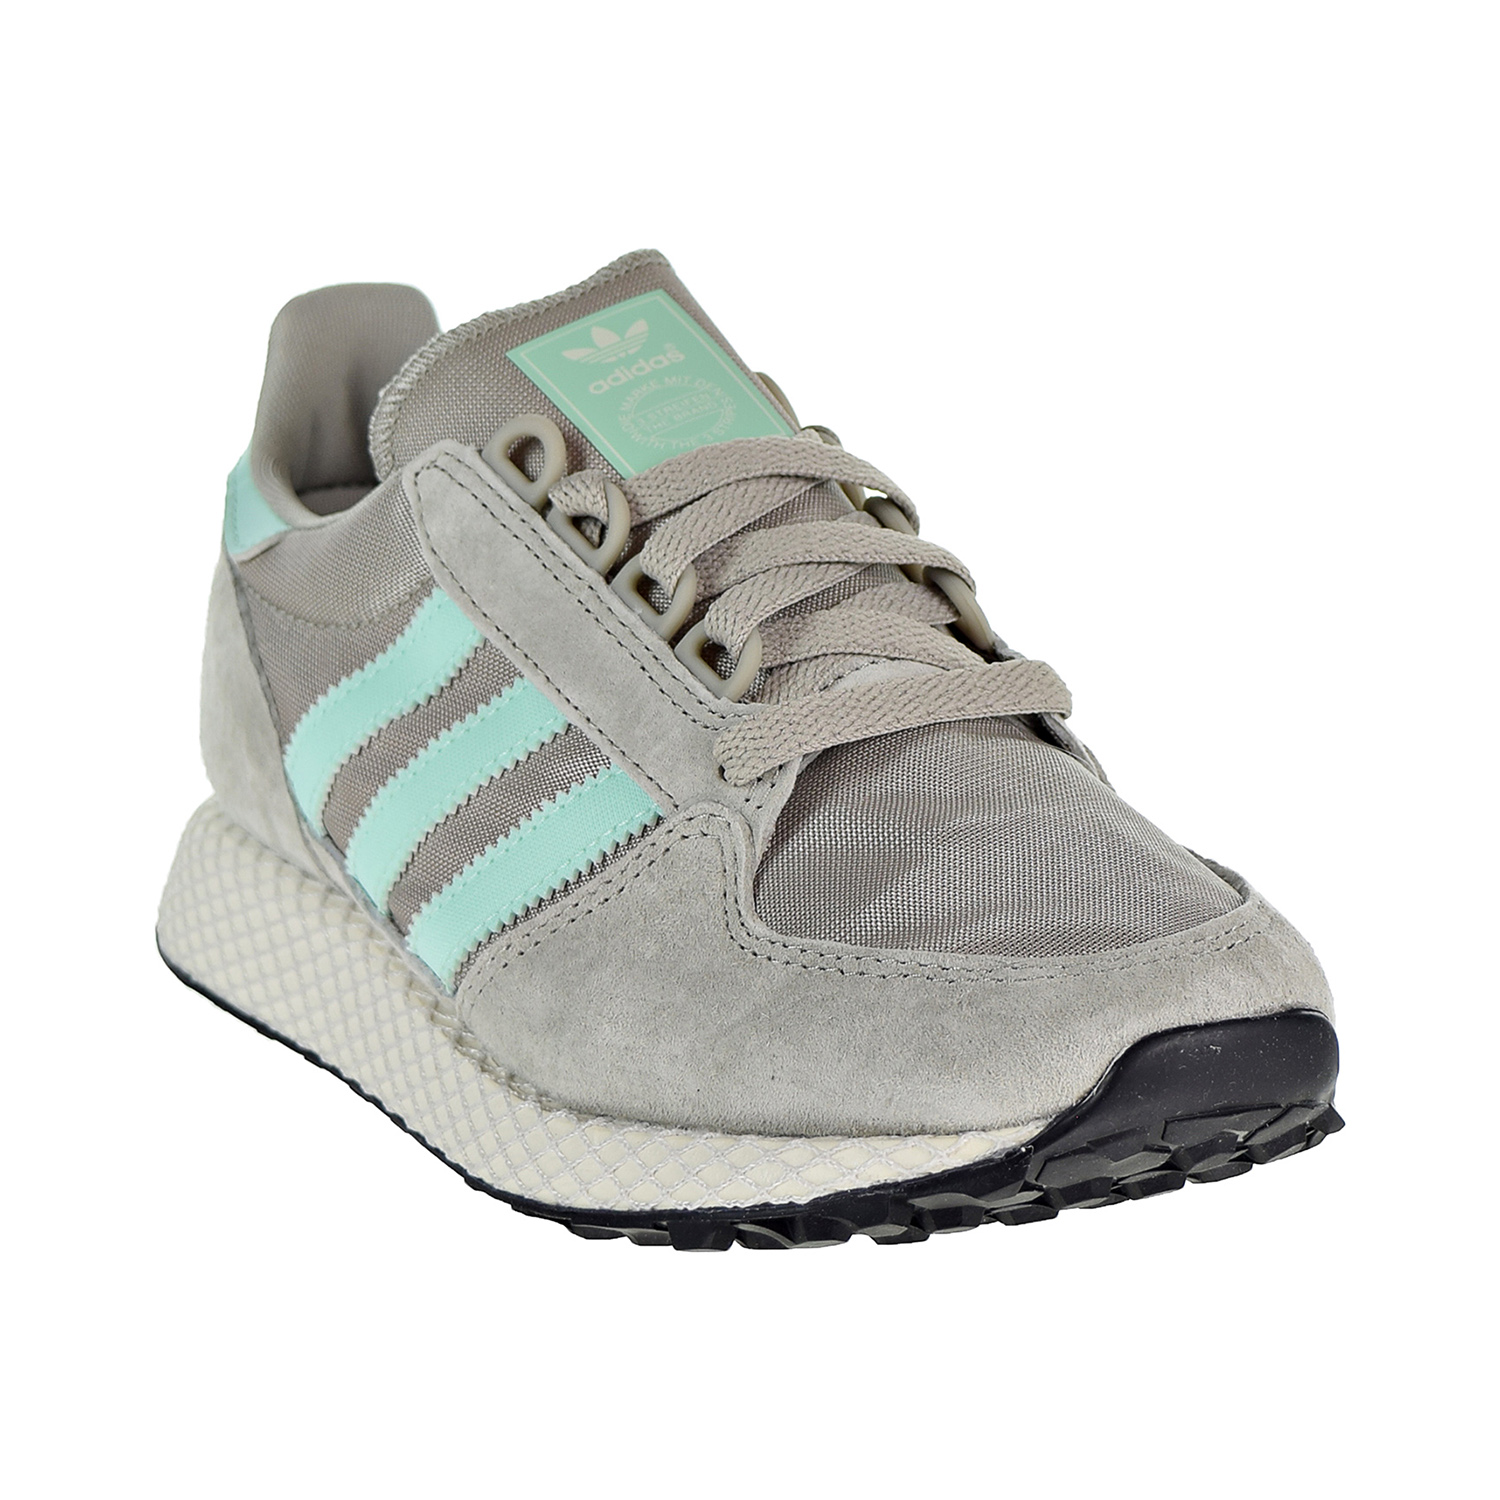 Objector Strict agency Adidas Forest Grove Women's Shoes Sesame-Running White-Core Black b75612